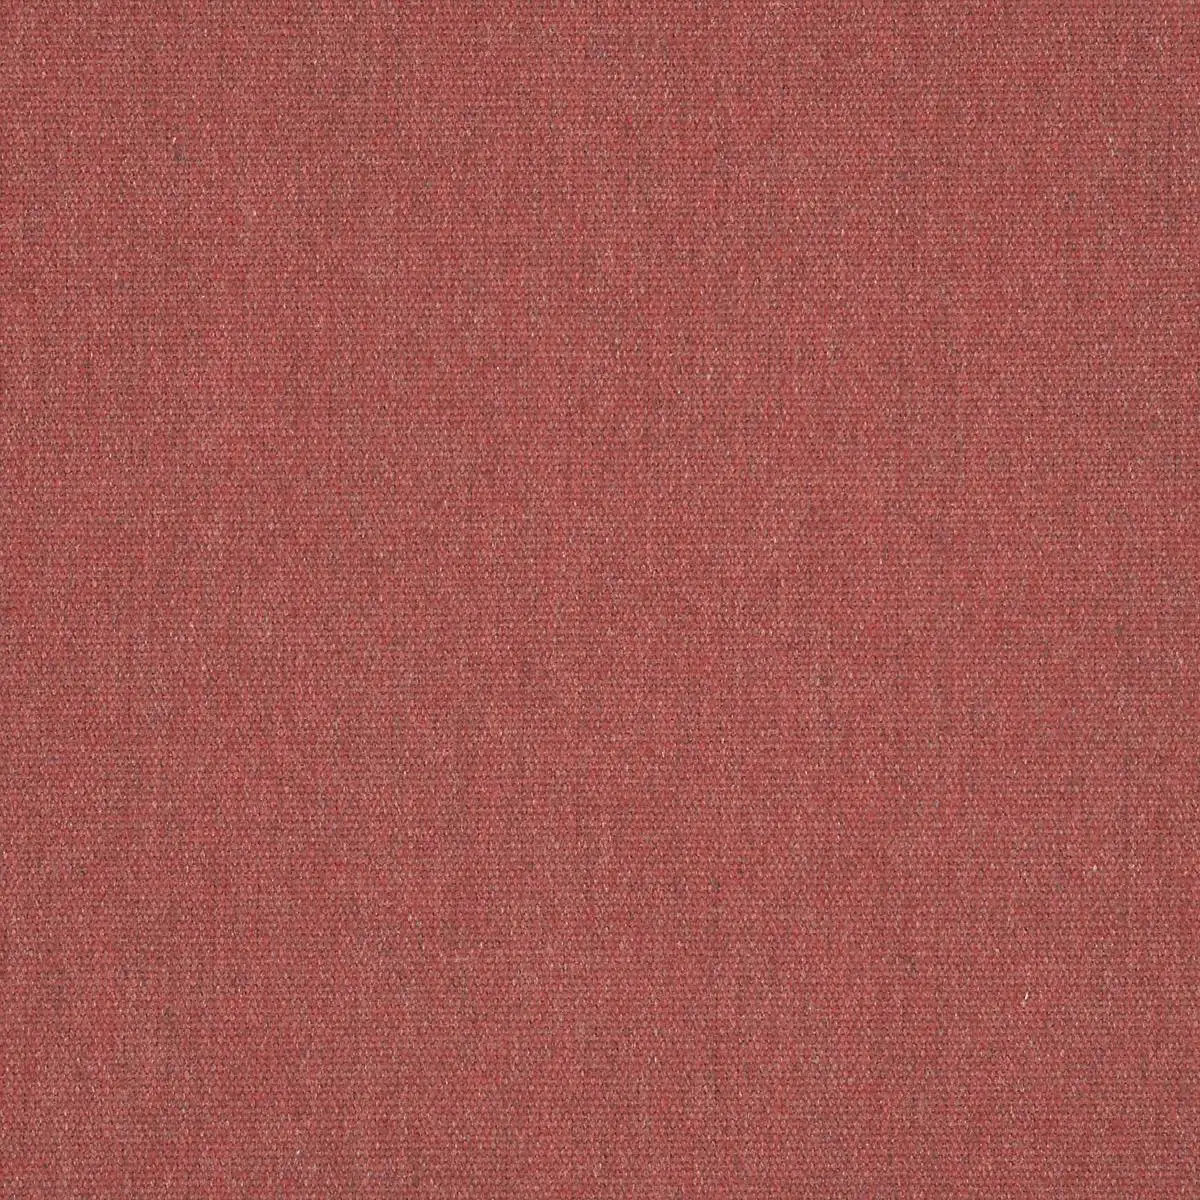 Fabric Colors C Heritage Scarlet Swatch